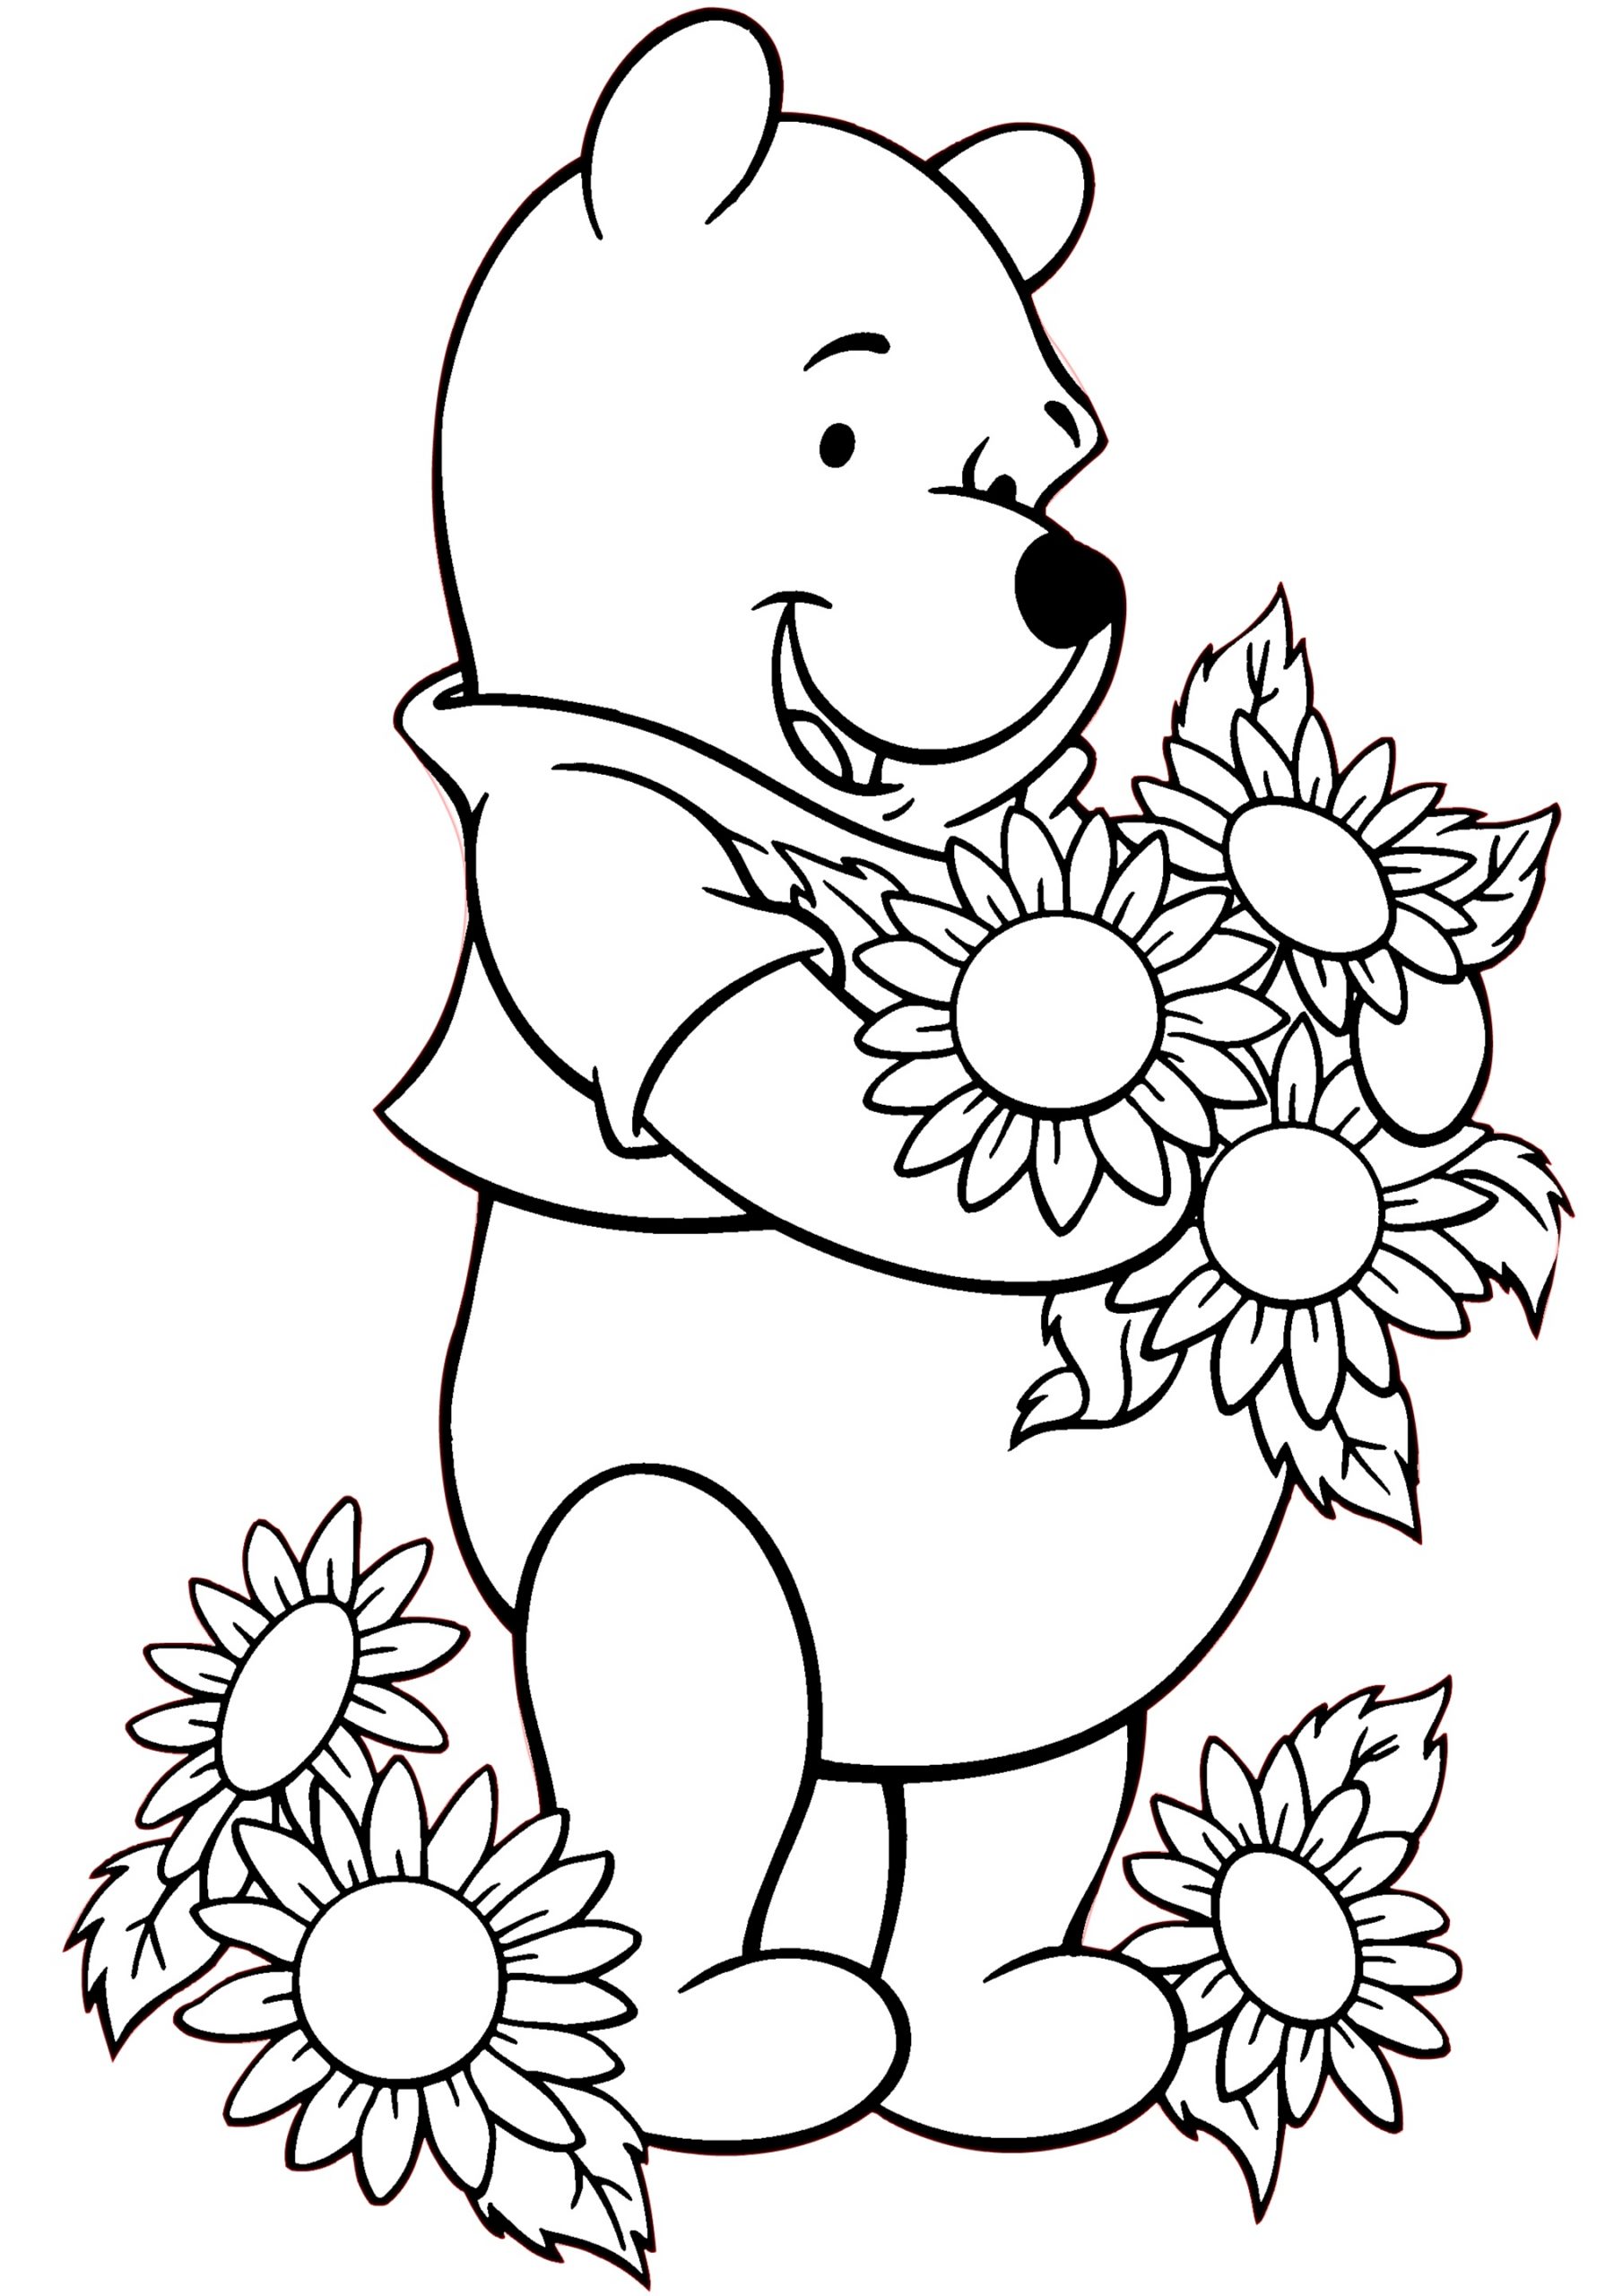 Disney Free Printable Coloring Pages